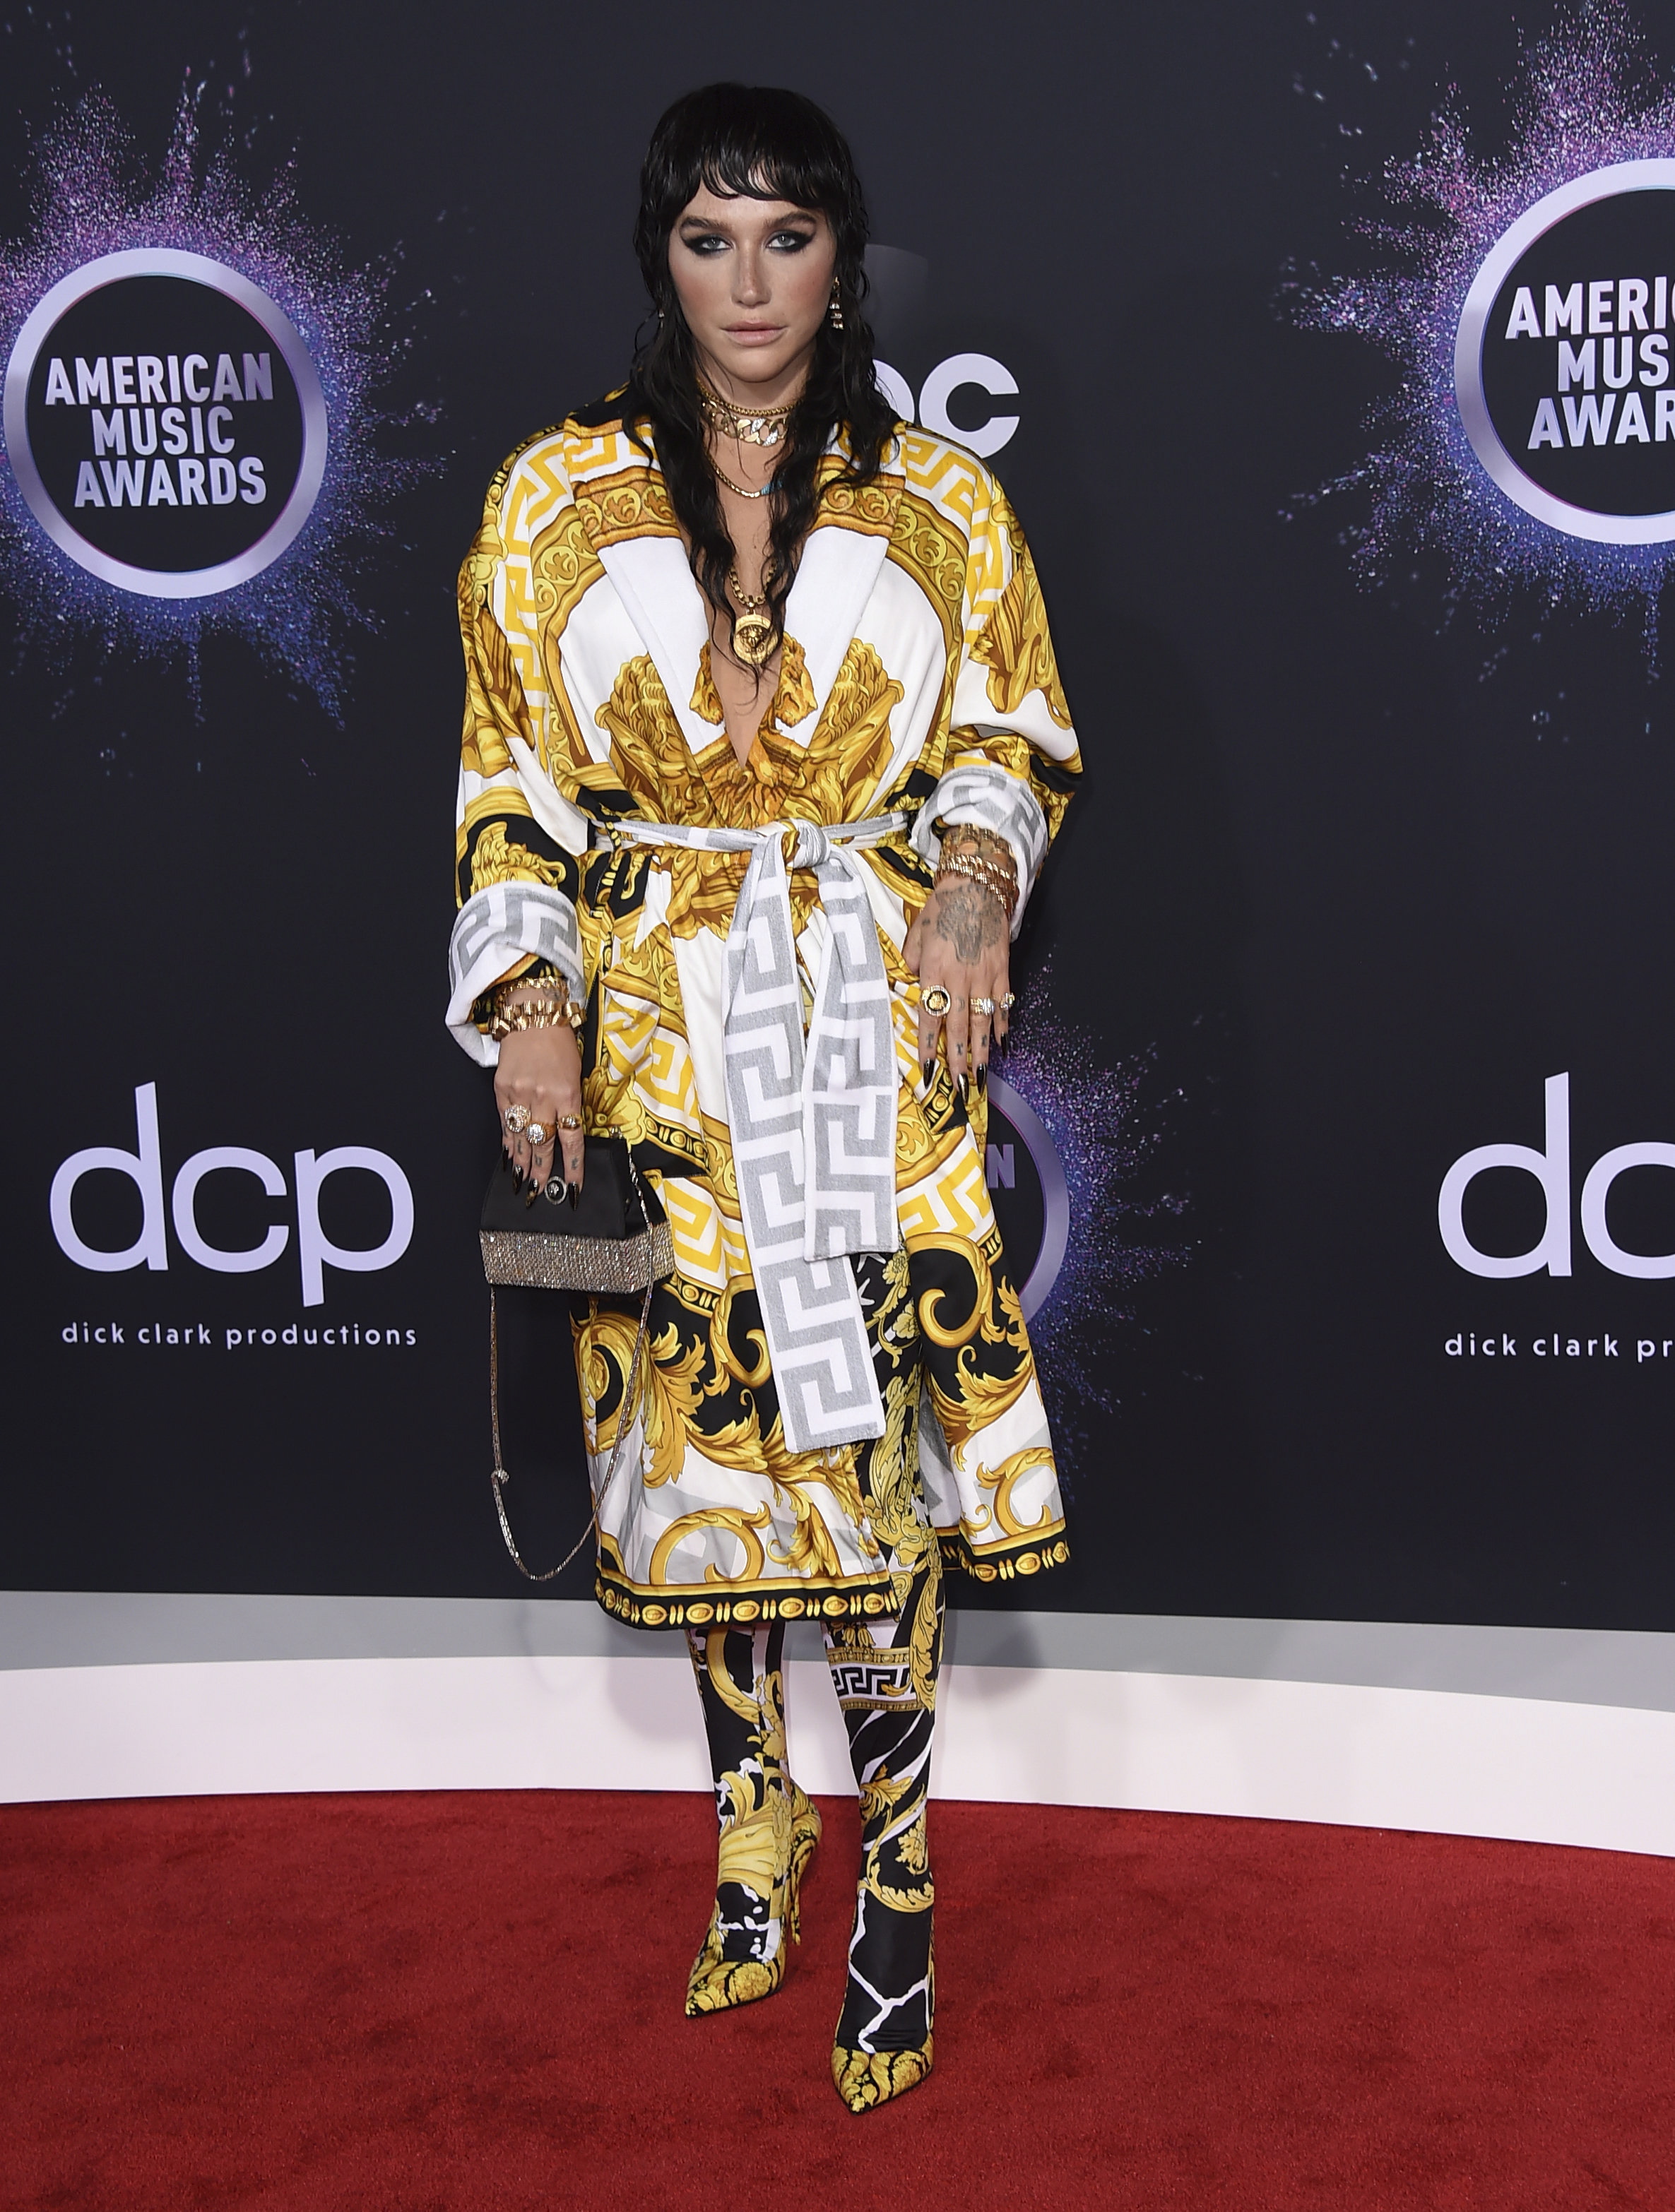 American Music Awards 2019: Best and worst dressed stars on the red ...